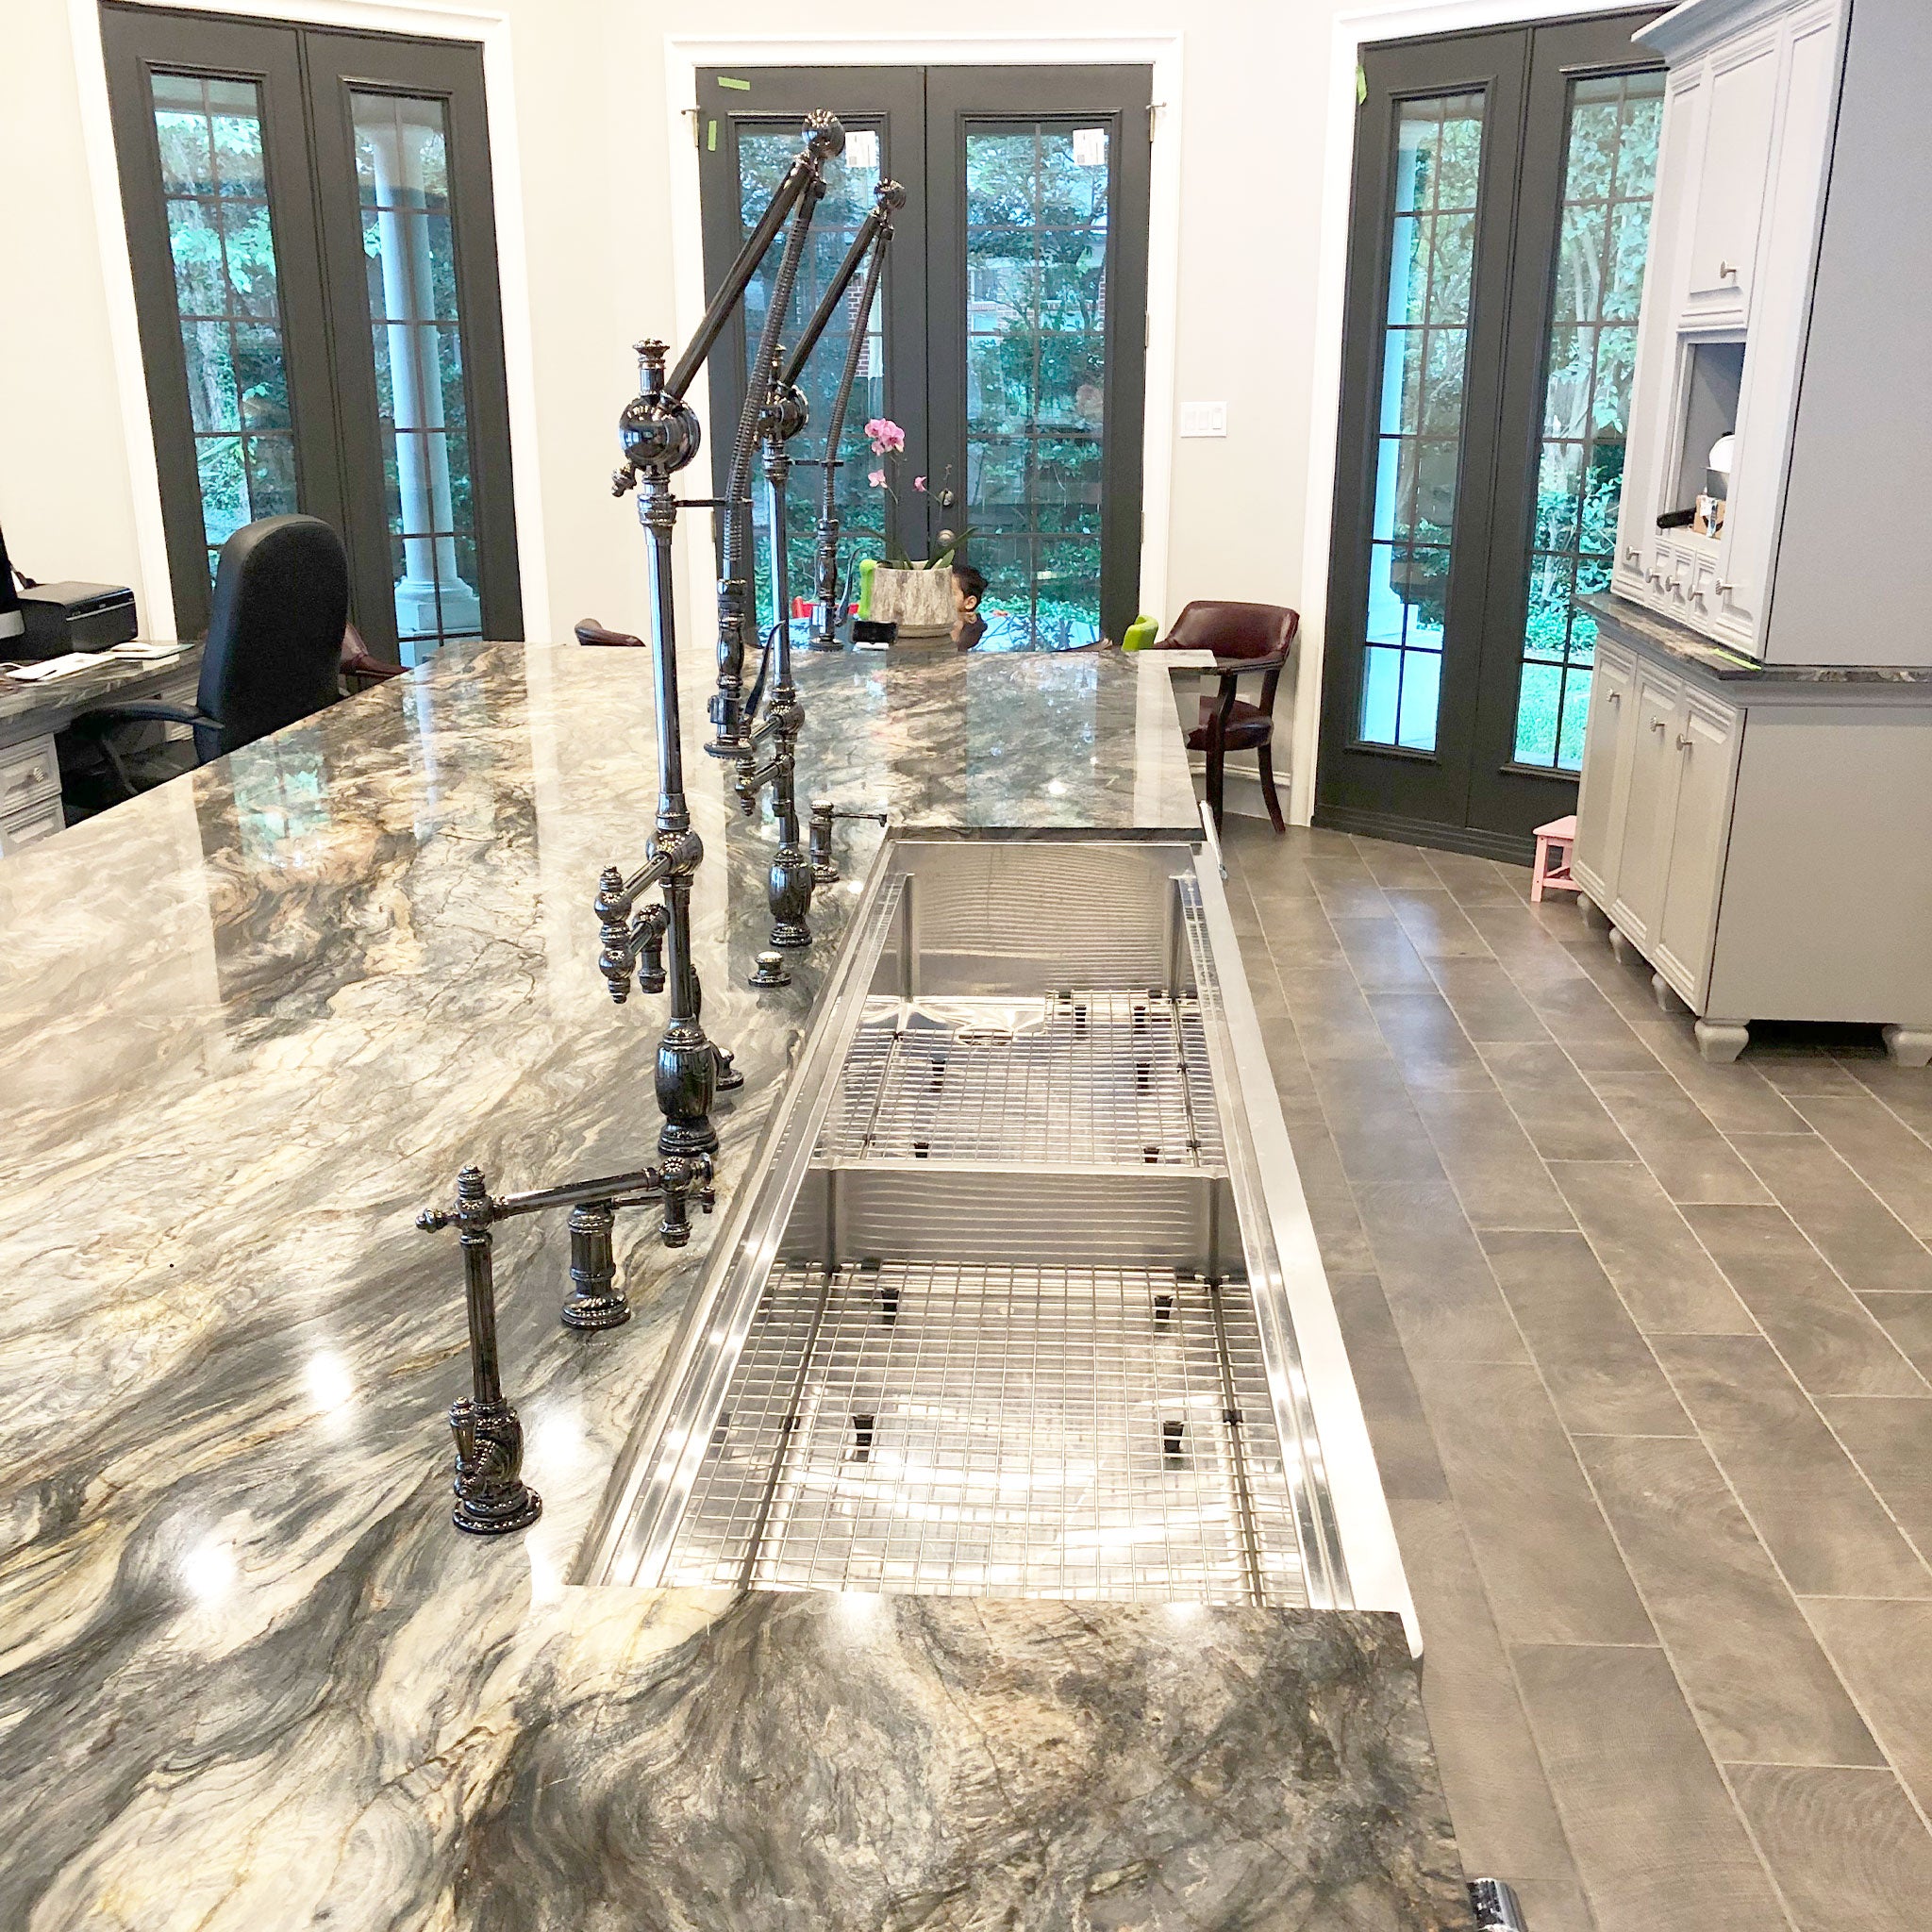 Client submitted photo of the double basin apron front 84" Stainless Steel Kitchen Sink